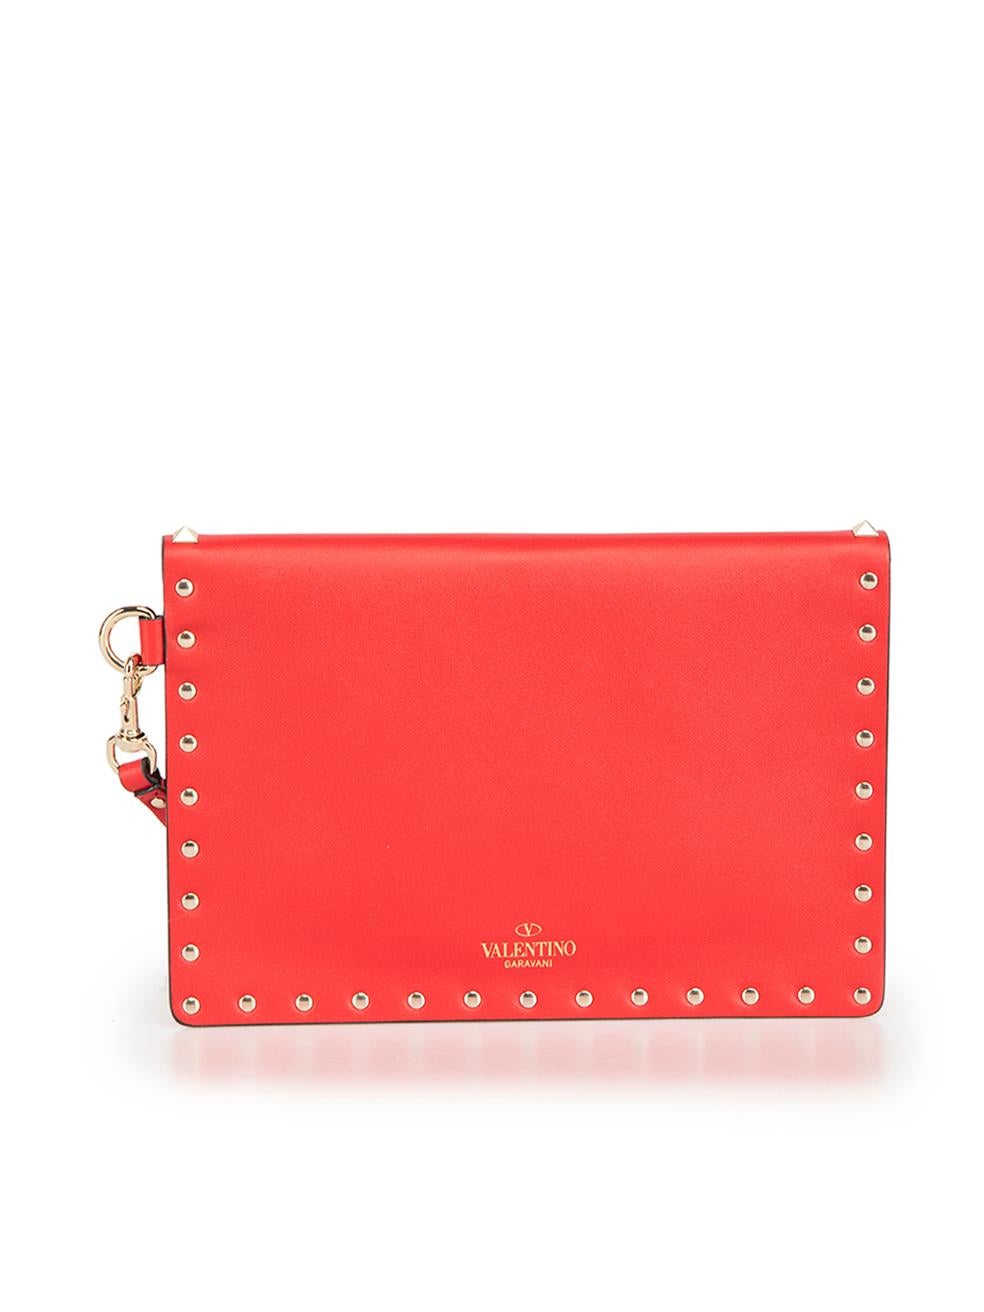 Valentino Red Leather Rockstud Wristlet Clutch In Excellent Condition In London, GB